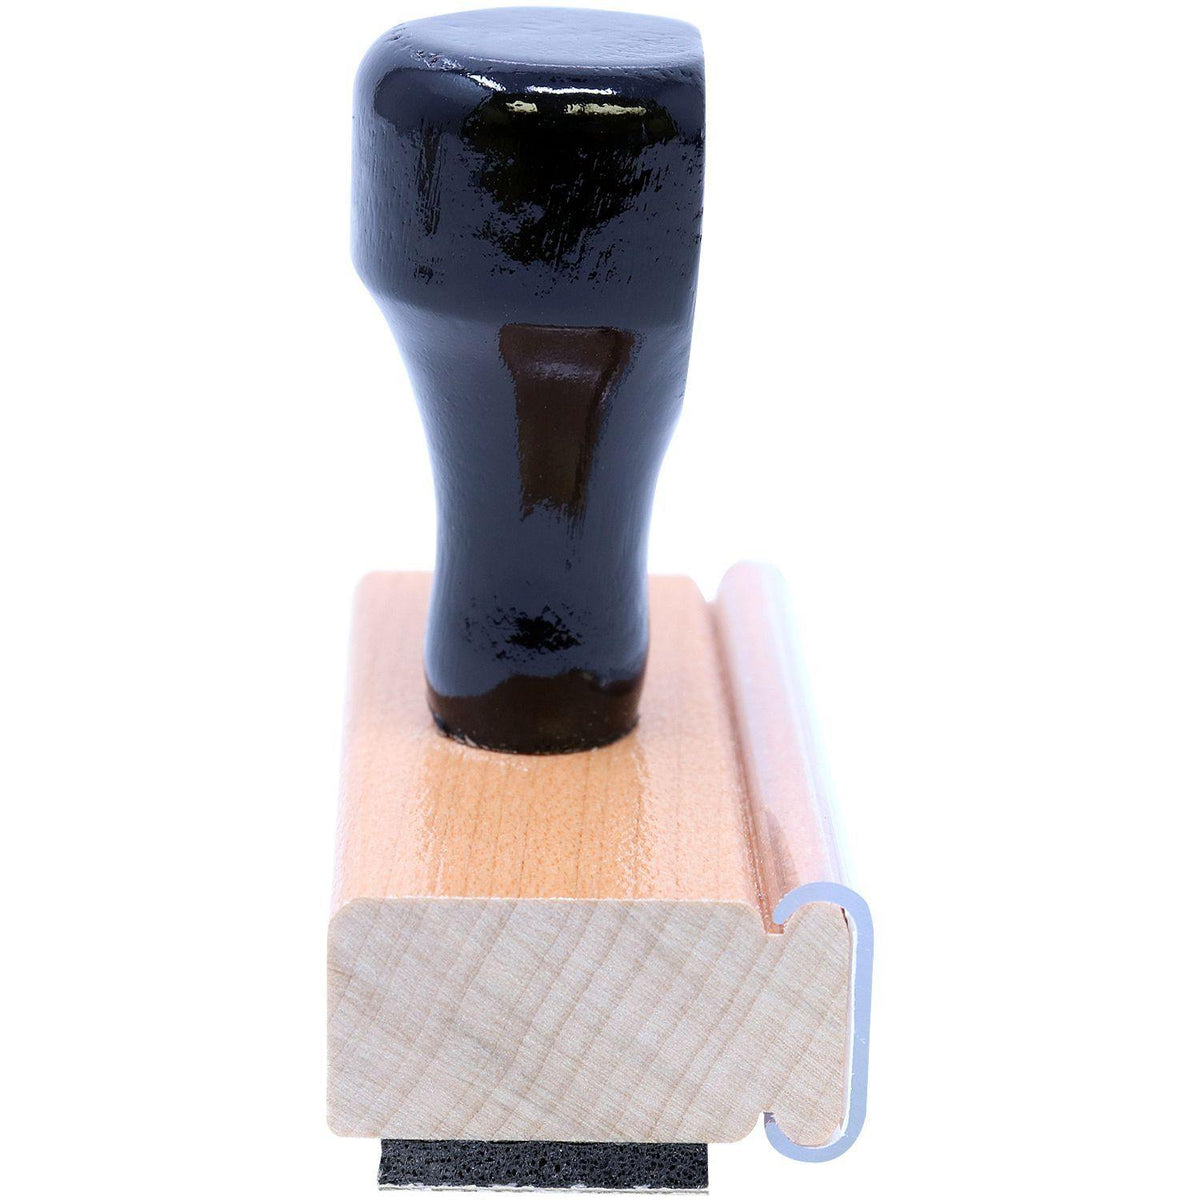 Lowercase Received with Date Box Rubber Stamp - Engineer Seal Stamps - Brand_Acorn, Impression Size_Small, Stamp Type_Regular Stamp, Type of Use_Postal, Type of Use_Shipping &amp; Receiving